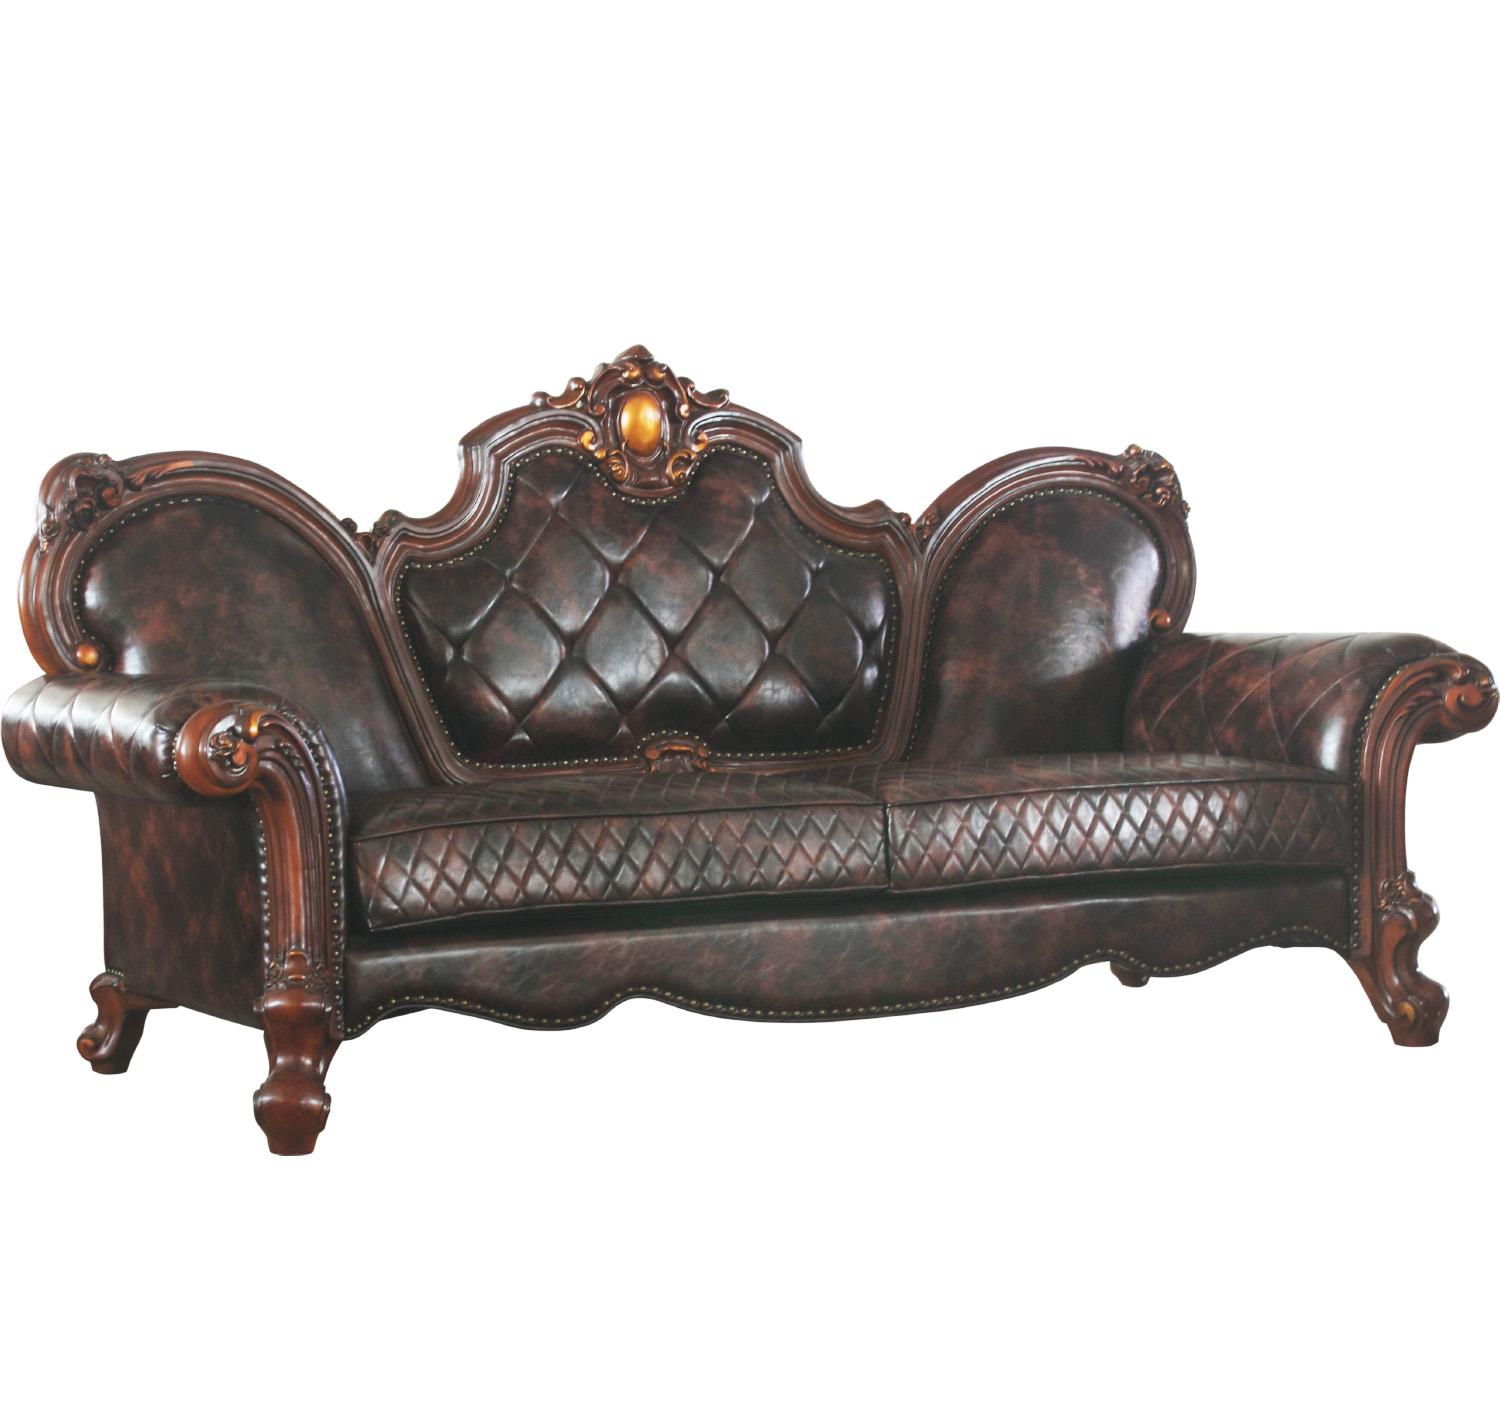 Classic, Traditional Sofa Picardy 58221 58221-Picardy in Oak, Cherry PU